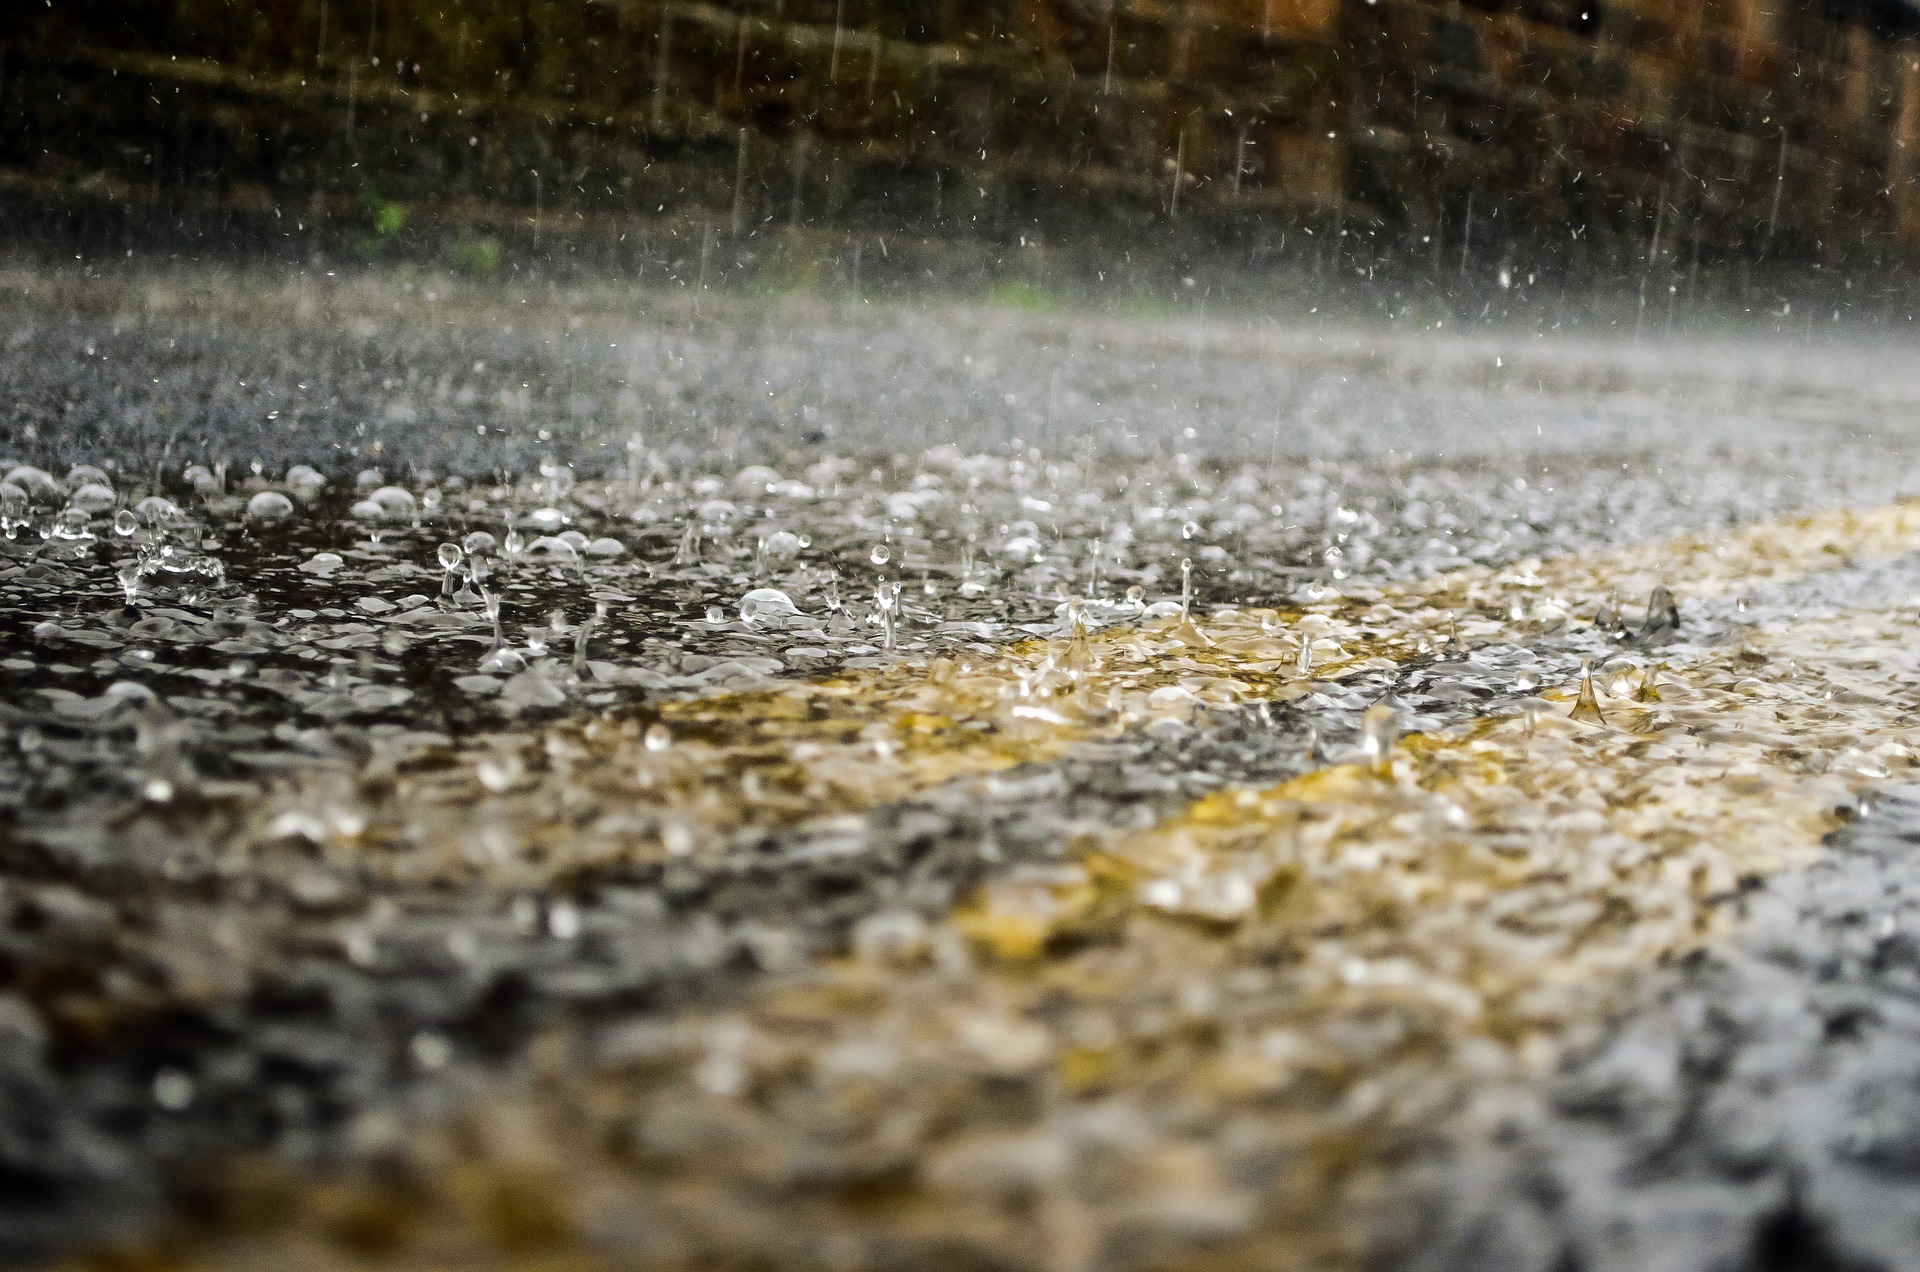 Close up of rain drops falling on a paved road